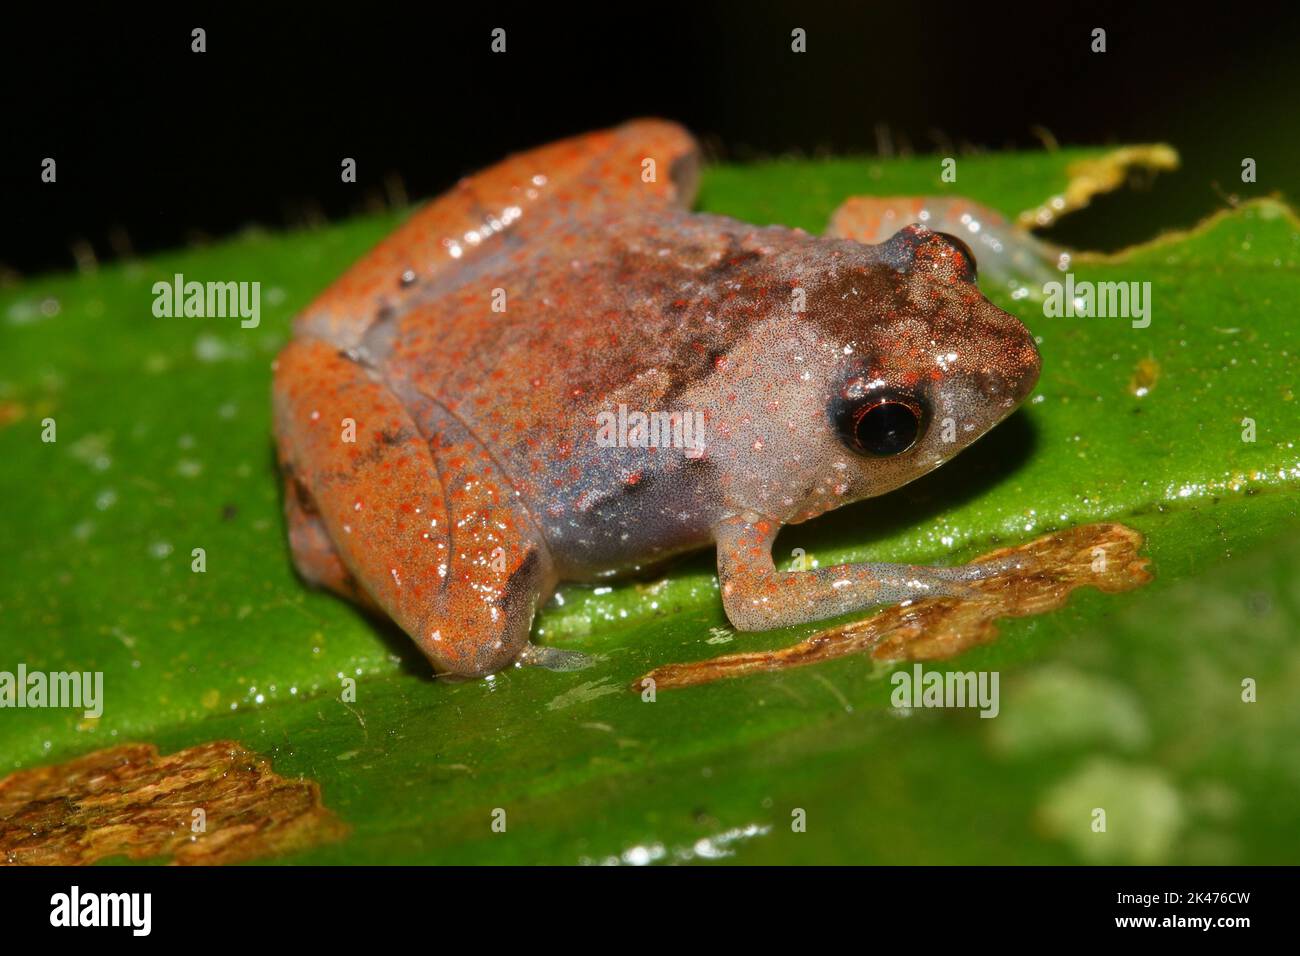 Matang narrow-mouthed frog (Microhyla borneensis - Microhyla nepenthicola) in a natural habitat Stock Photo